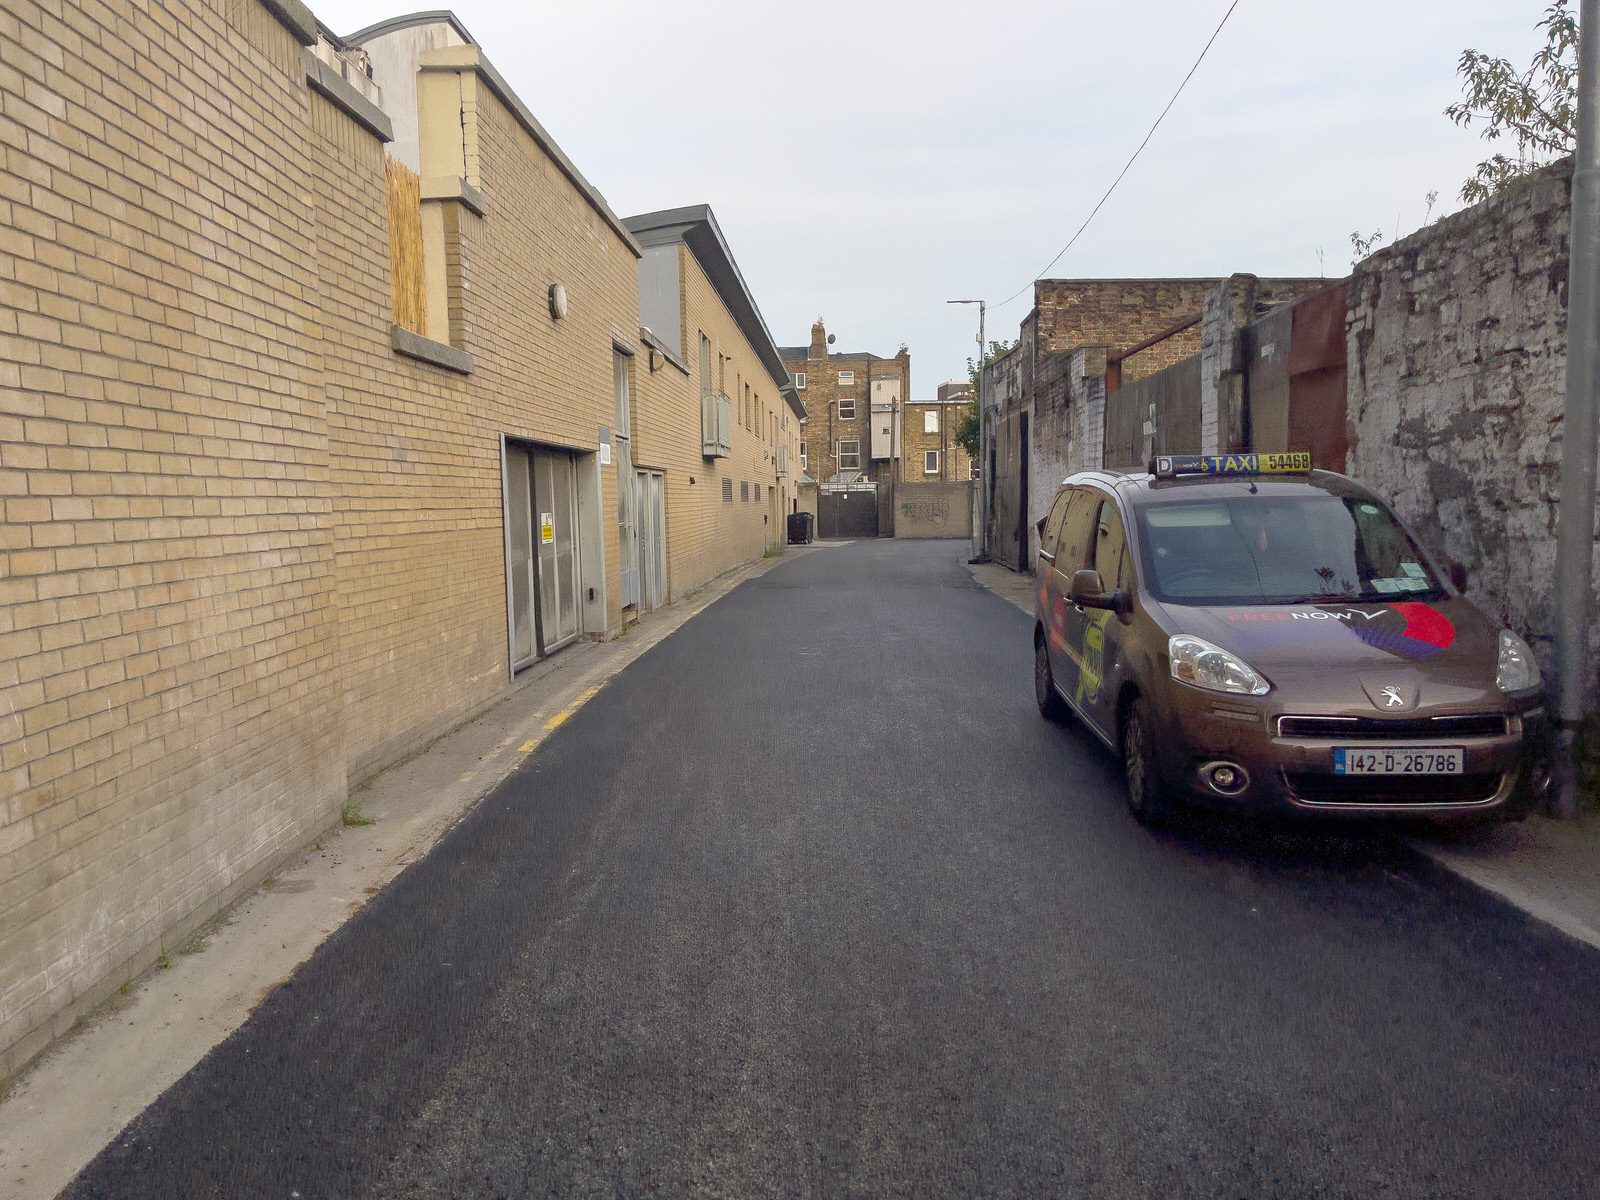 HENRIETTA LANE HAS BEEN RESURFACED [TO THE SIDE OF AND BEHIND 4 AND 3 HENRIETTA STREET] 025